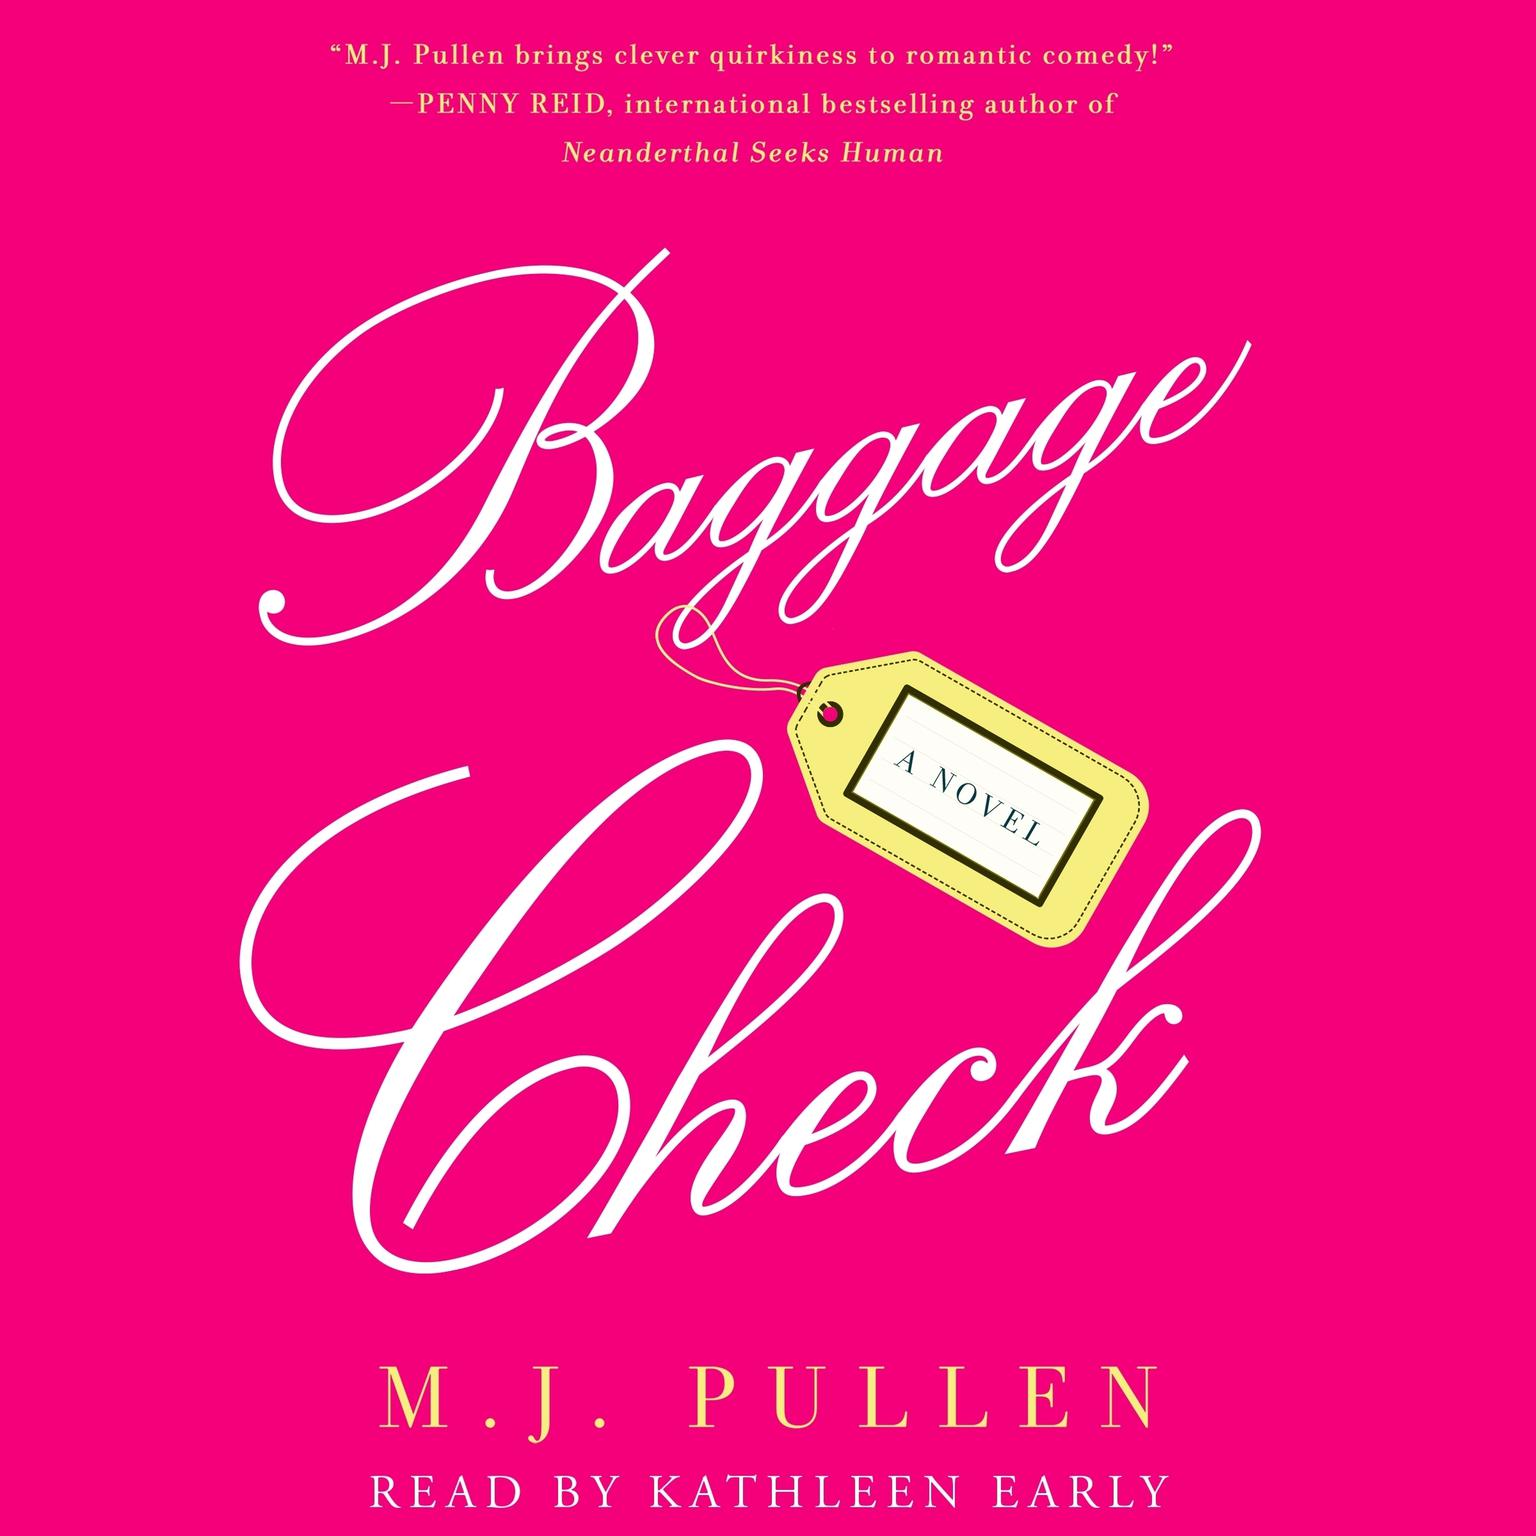 Baggage Check: A Novel Audiobook, by M. J. Pullen